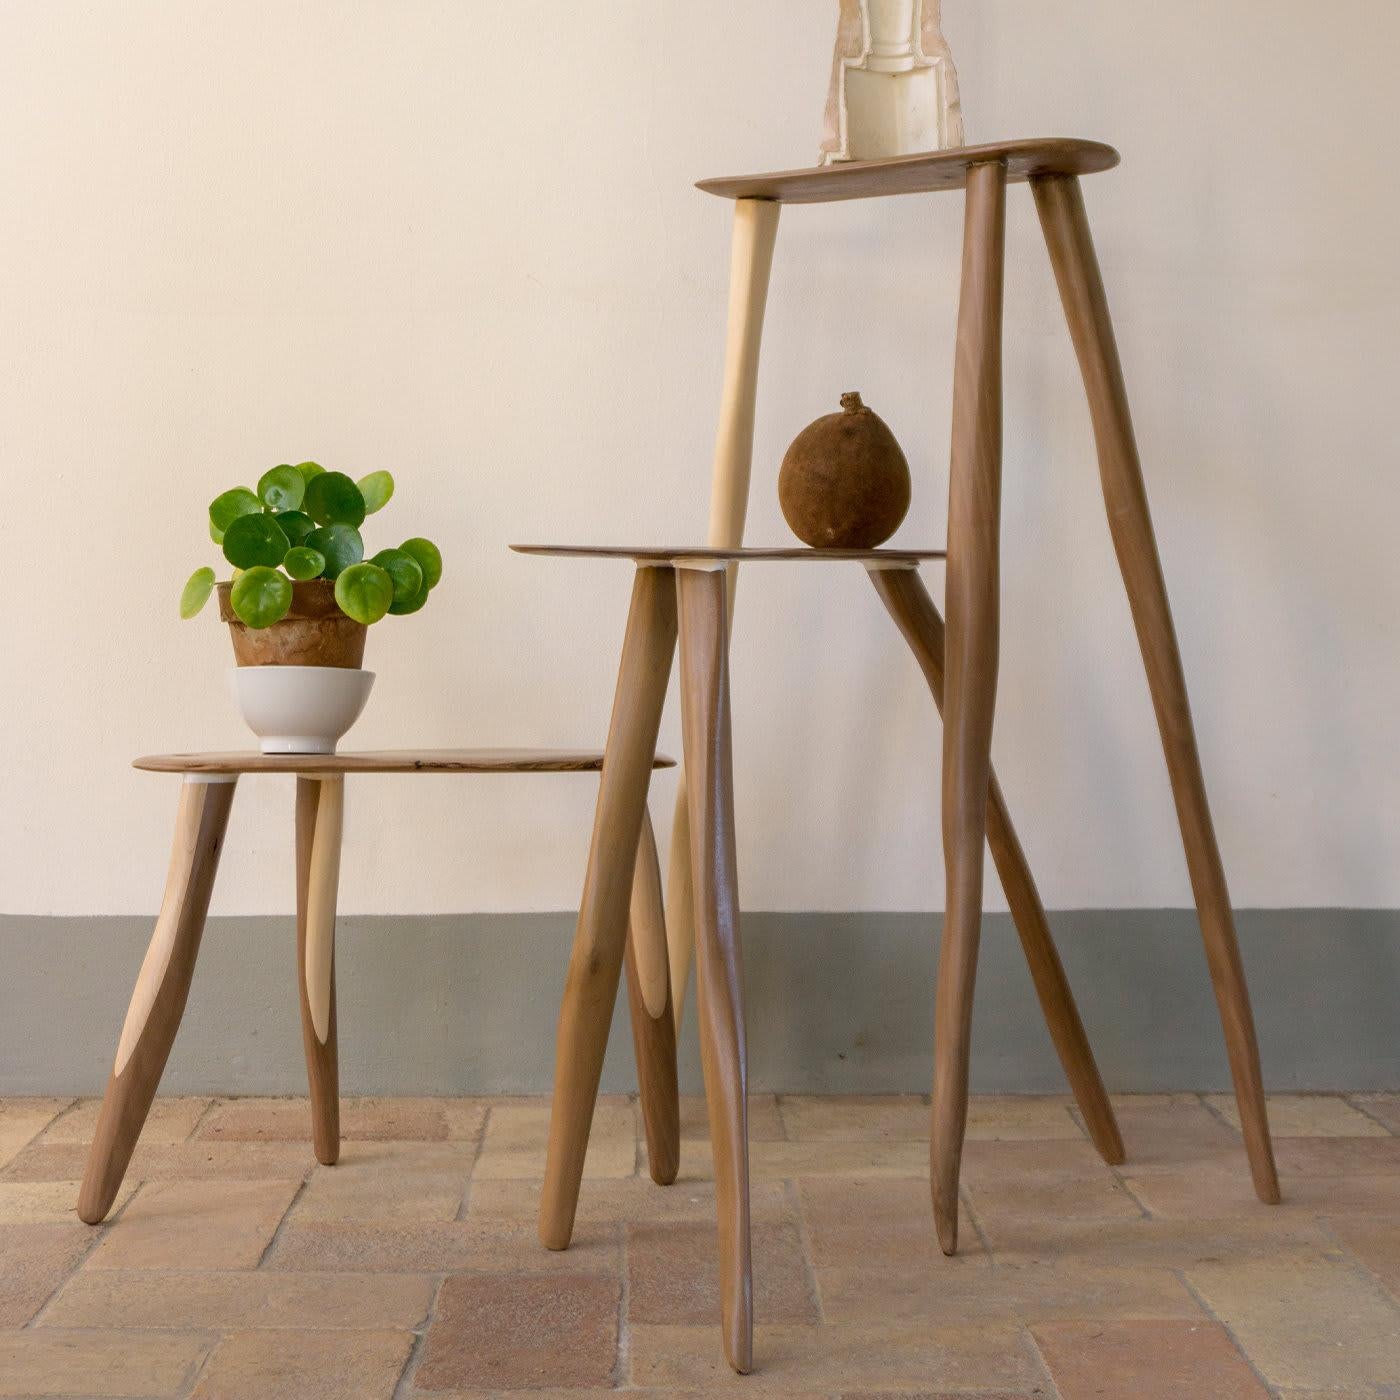 Crafted entirely of scrap wood and leftover cuts of Canaletto walnut and maple, this stylish trio strikes with its sleek profile and tall slanted legs. The sculpted side tables enhance the grain of the wood, guaranteeing a sublime charm and